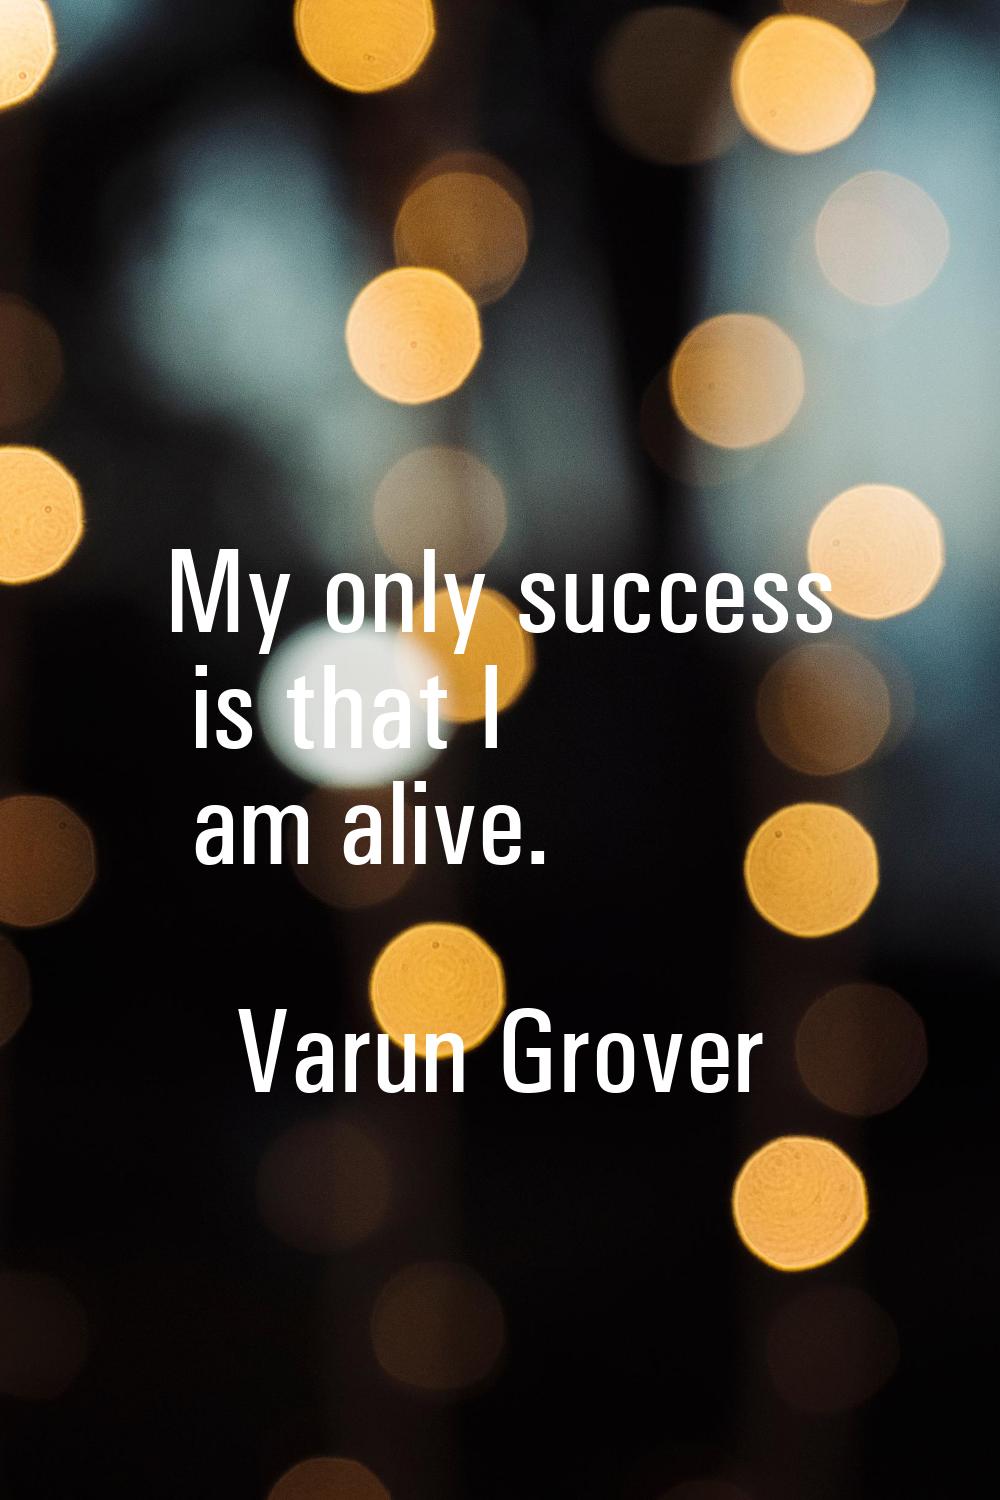 My only success is that I am alive.